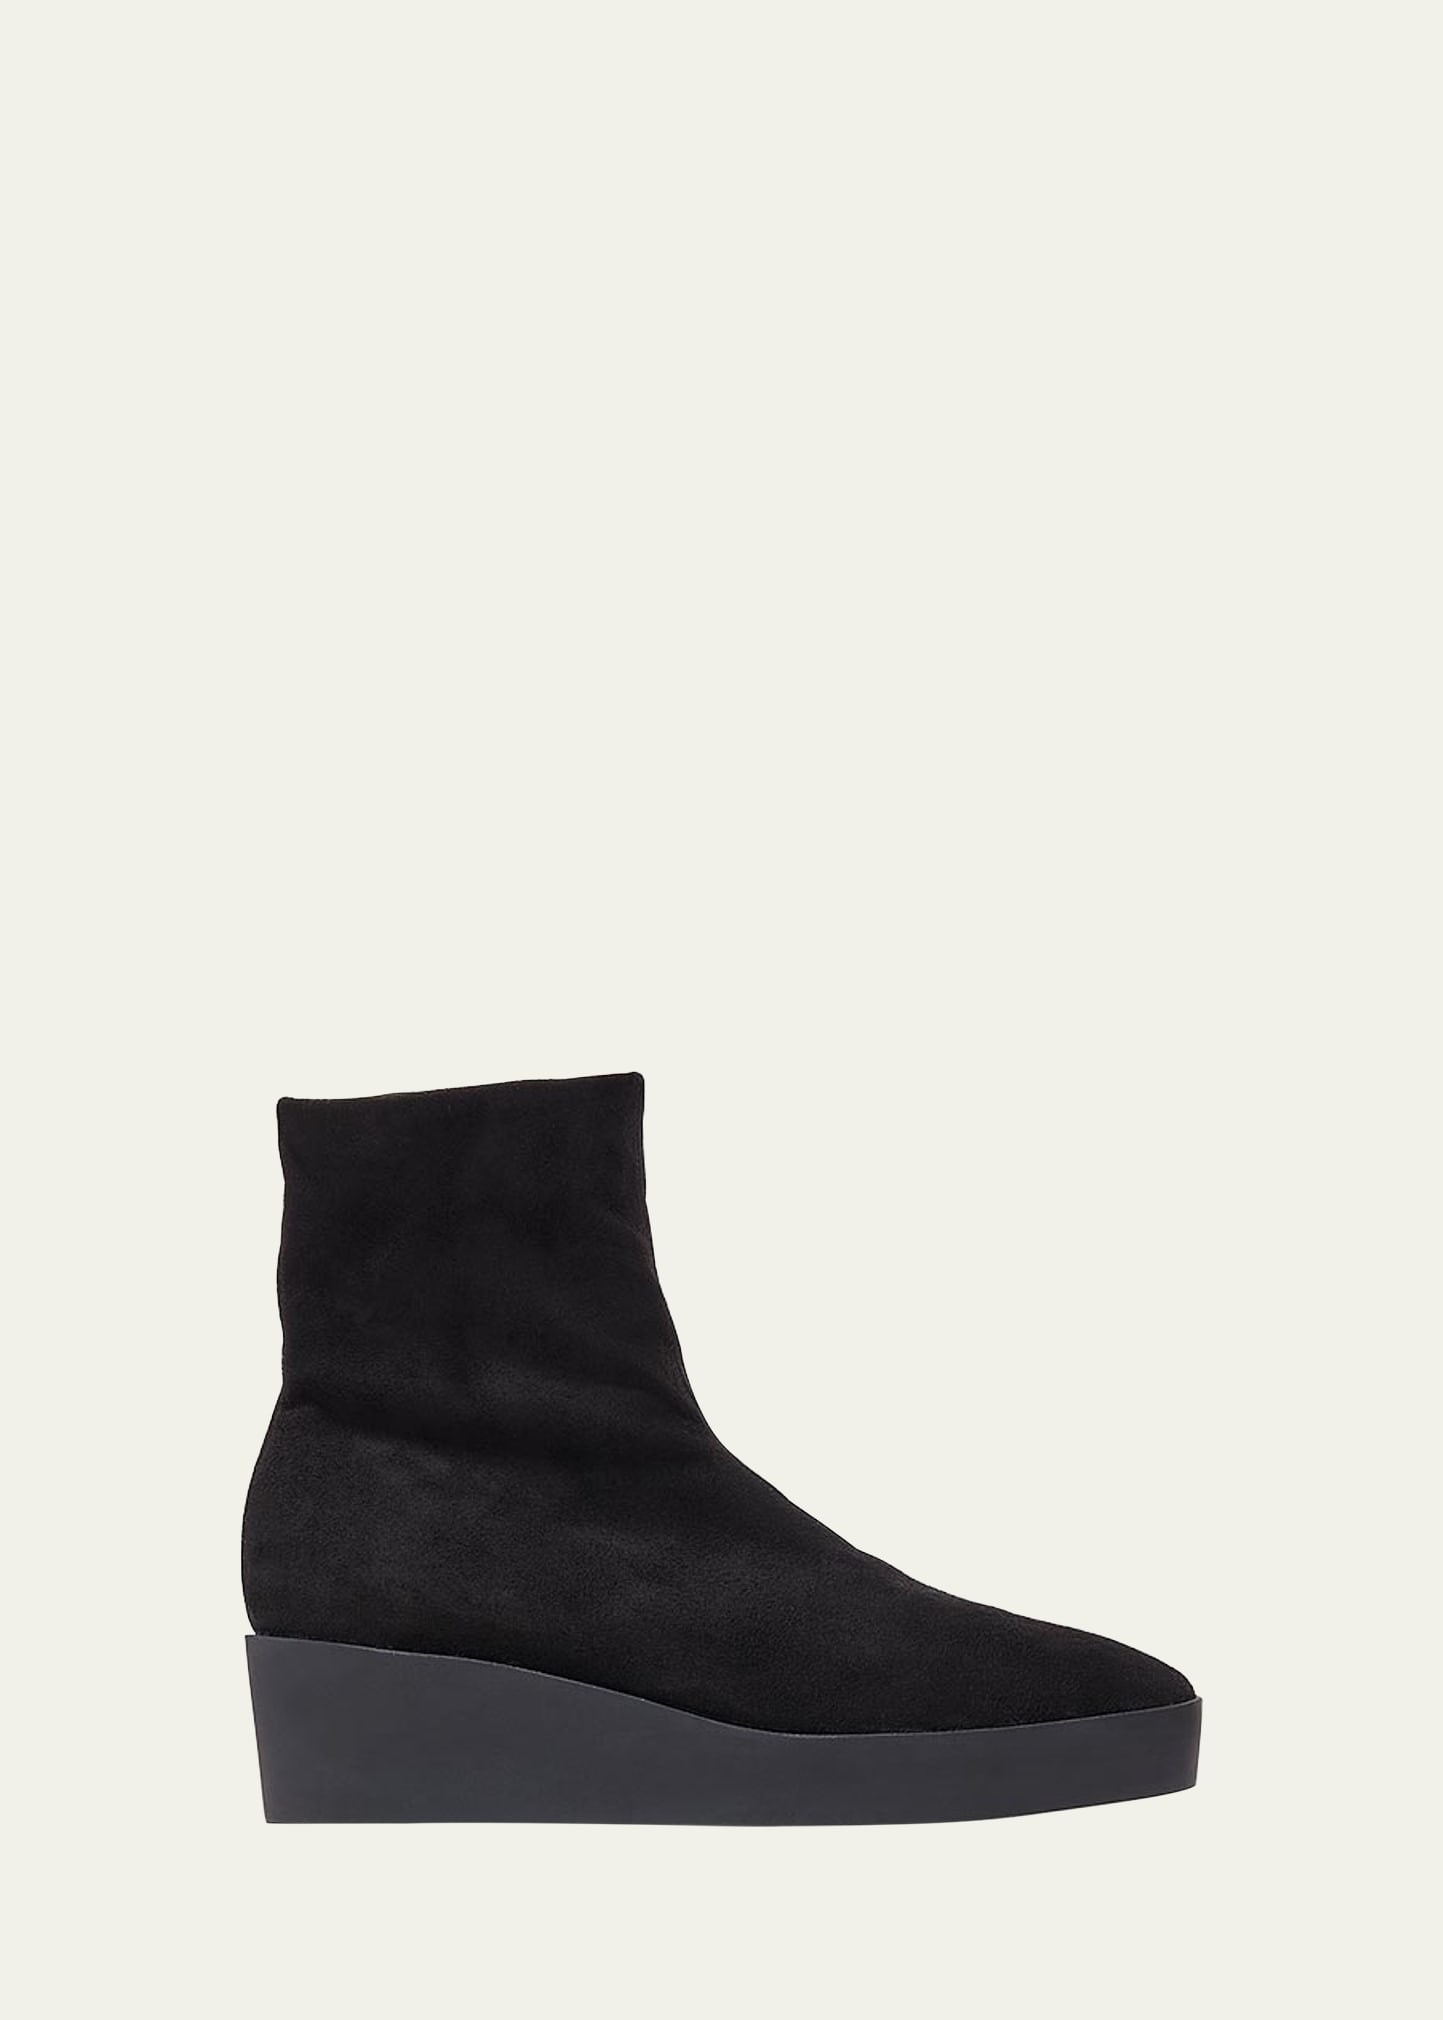 Demi-Wedge Stretch Suede Booties